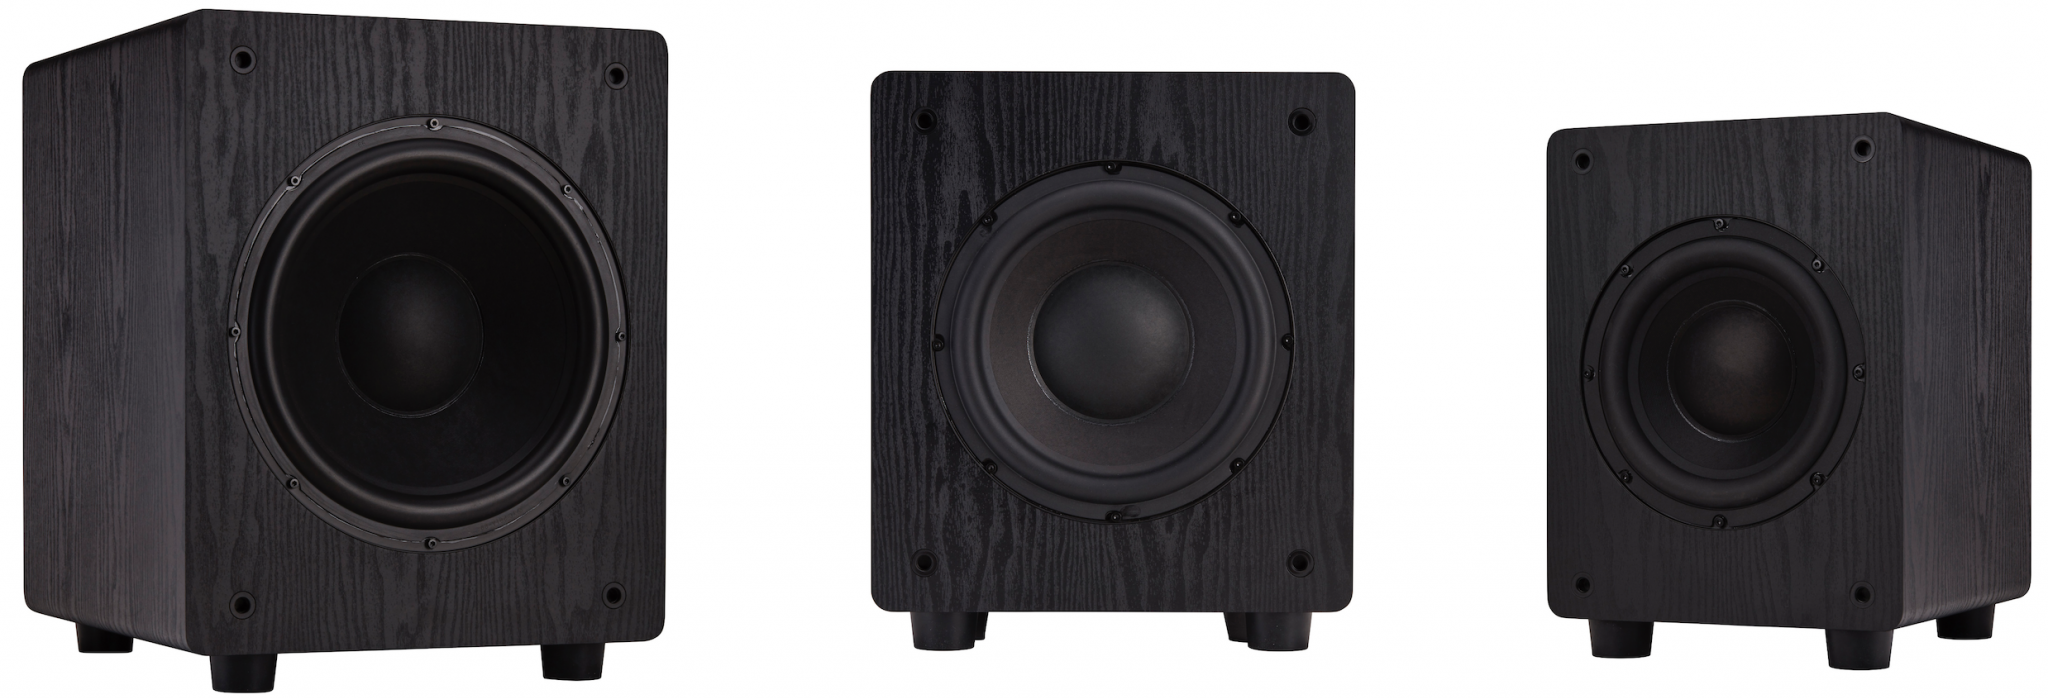 F3 Subwoofers from Fyne Audio